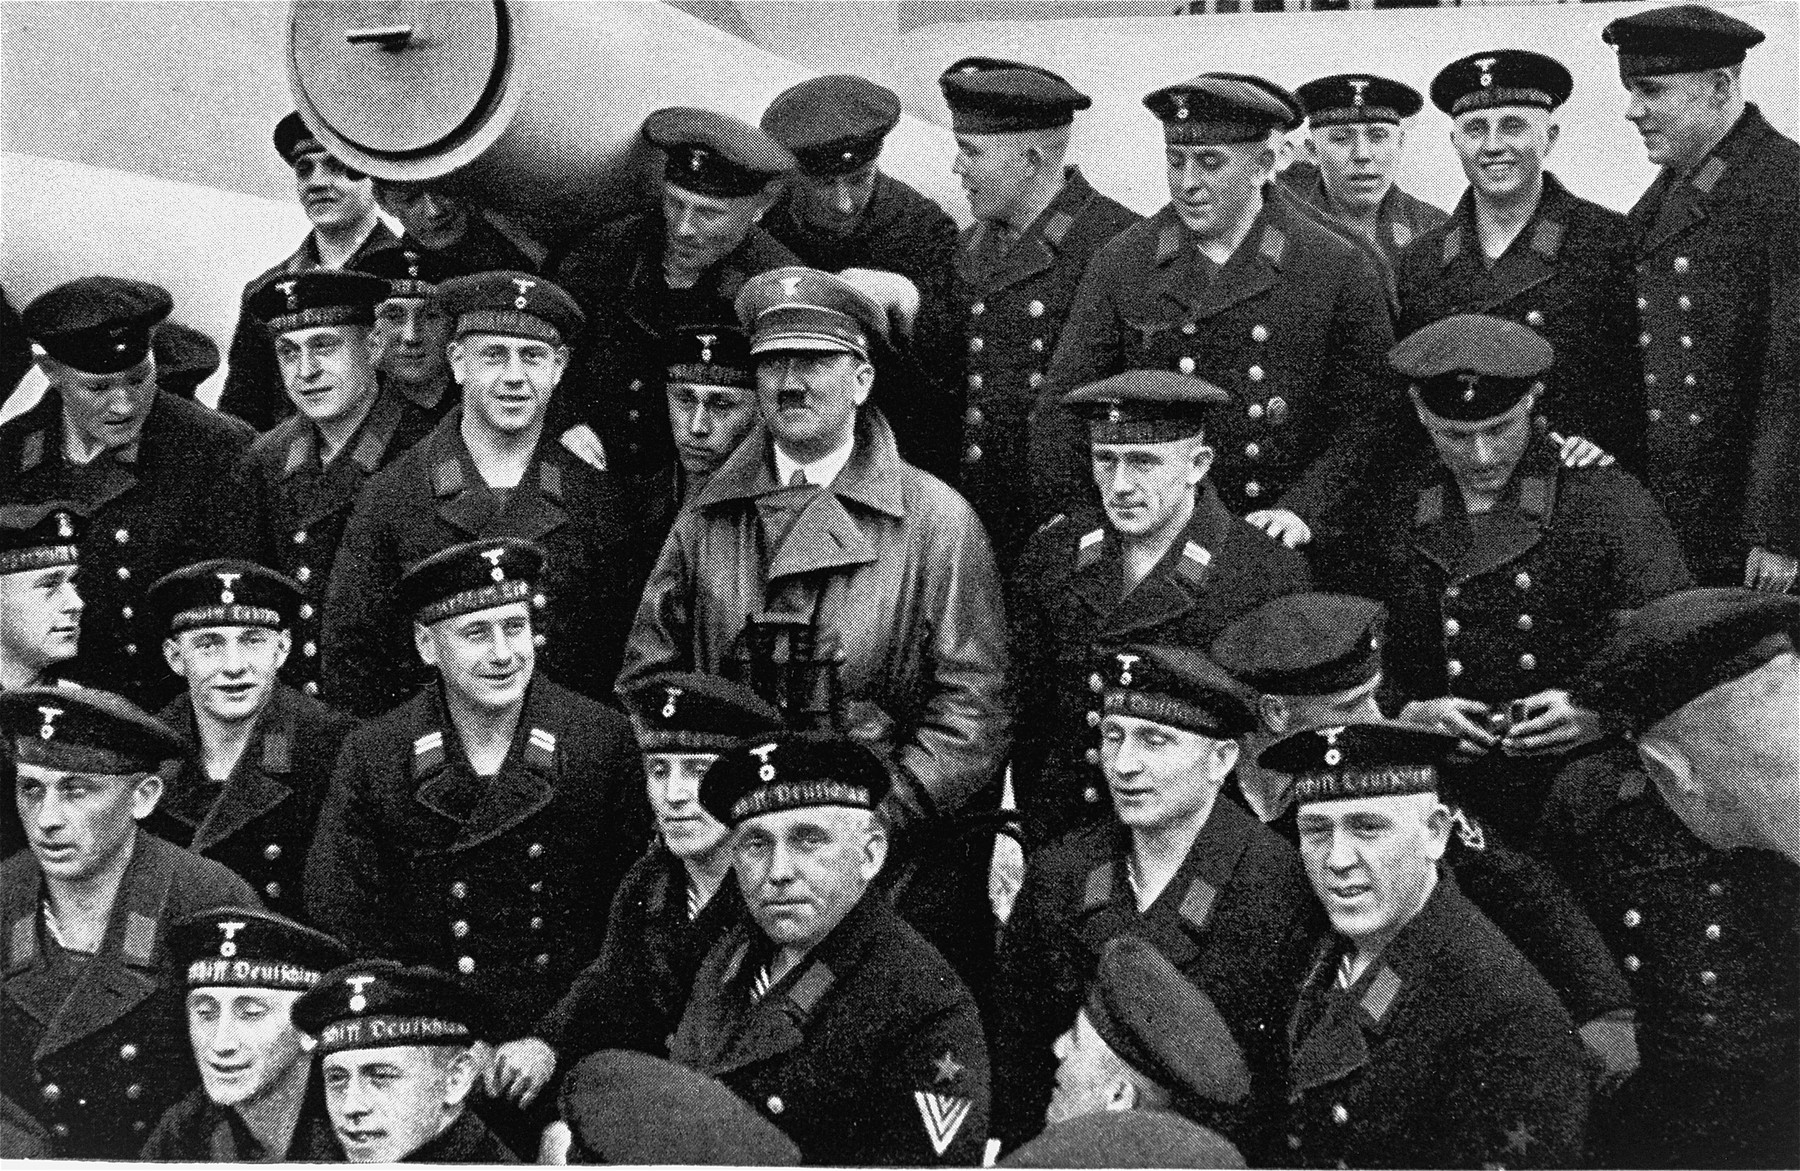 Adolf Hitler poses with a group of sailors aboard the Deutschland battleship